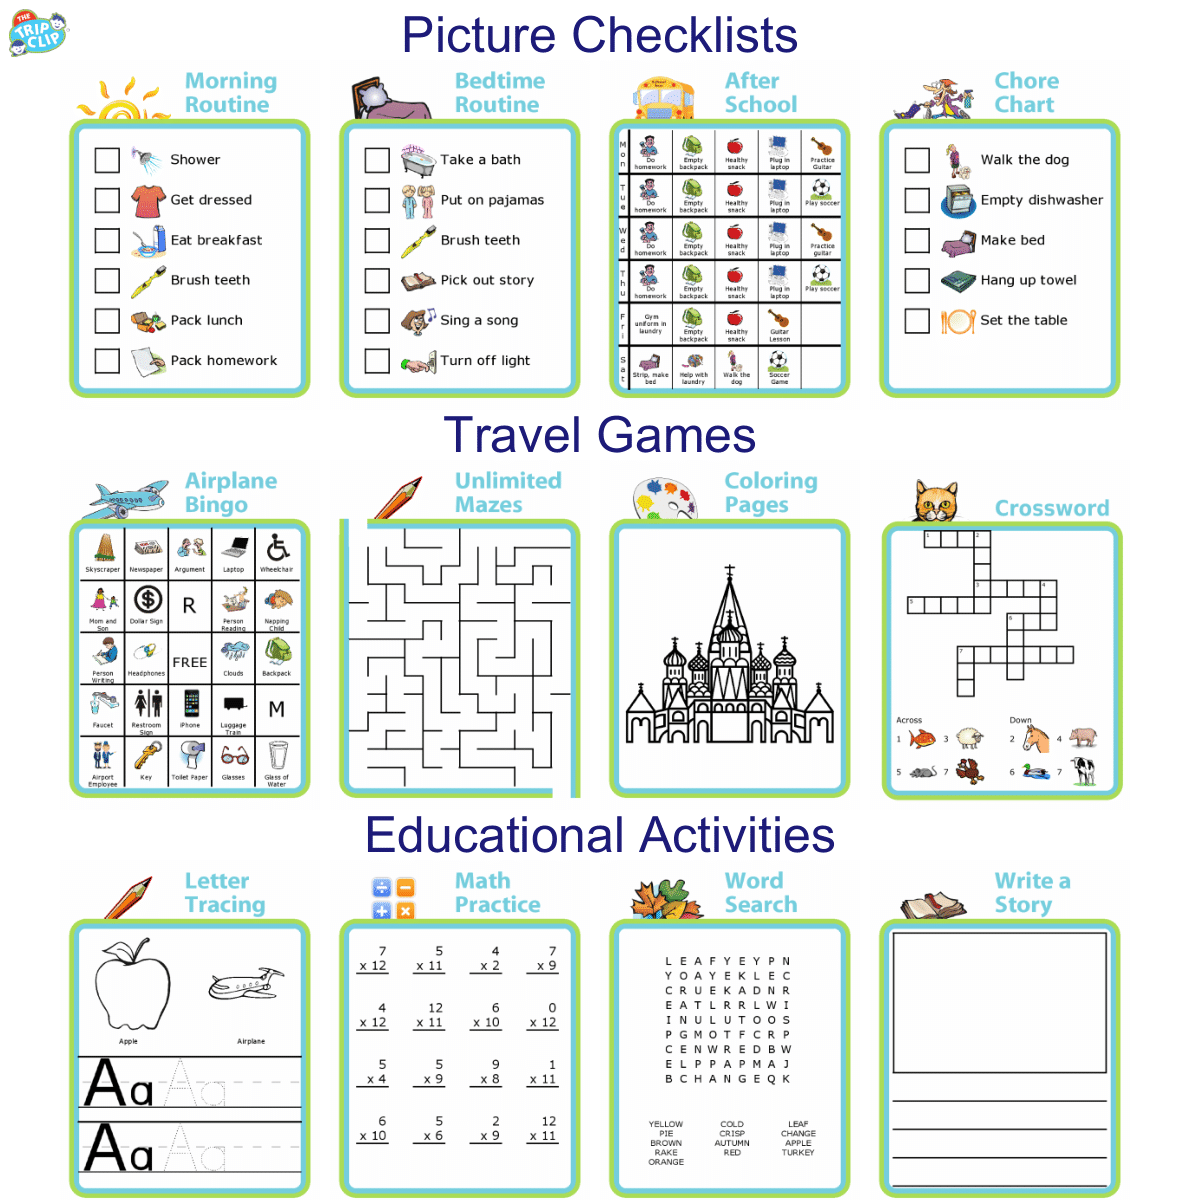 12 printable activities for kids: bingo, mazes, word search, coloring, crossword, license plate game, tic tac toe, cryptogram, alphabet game, drawing starters, battleship